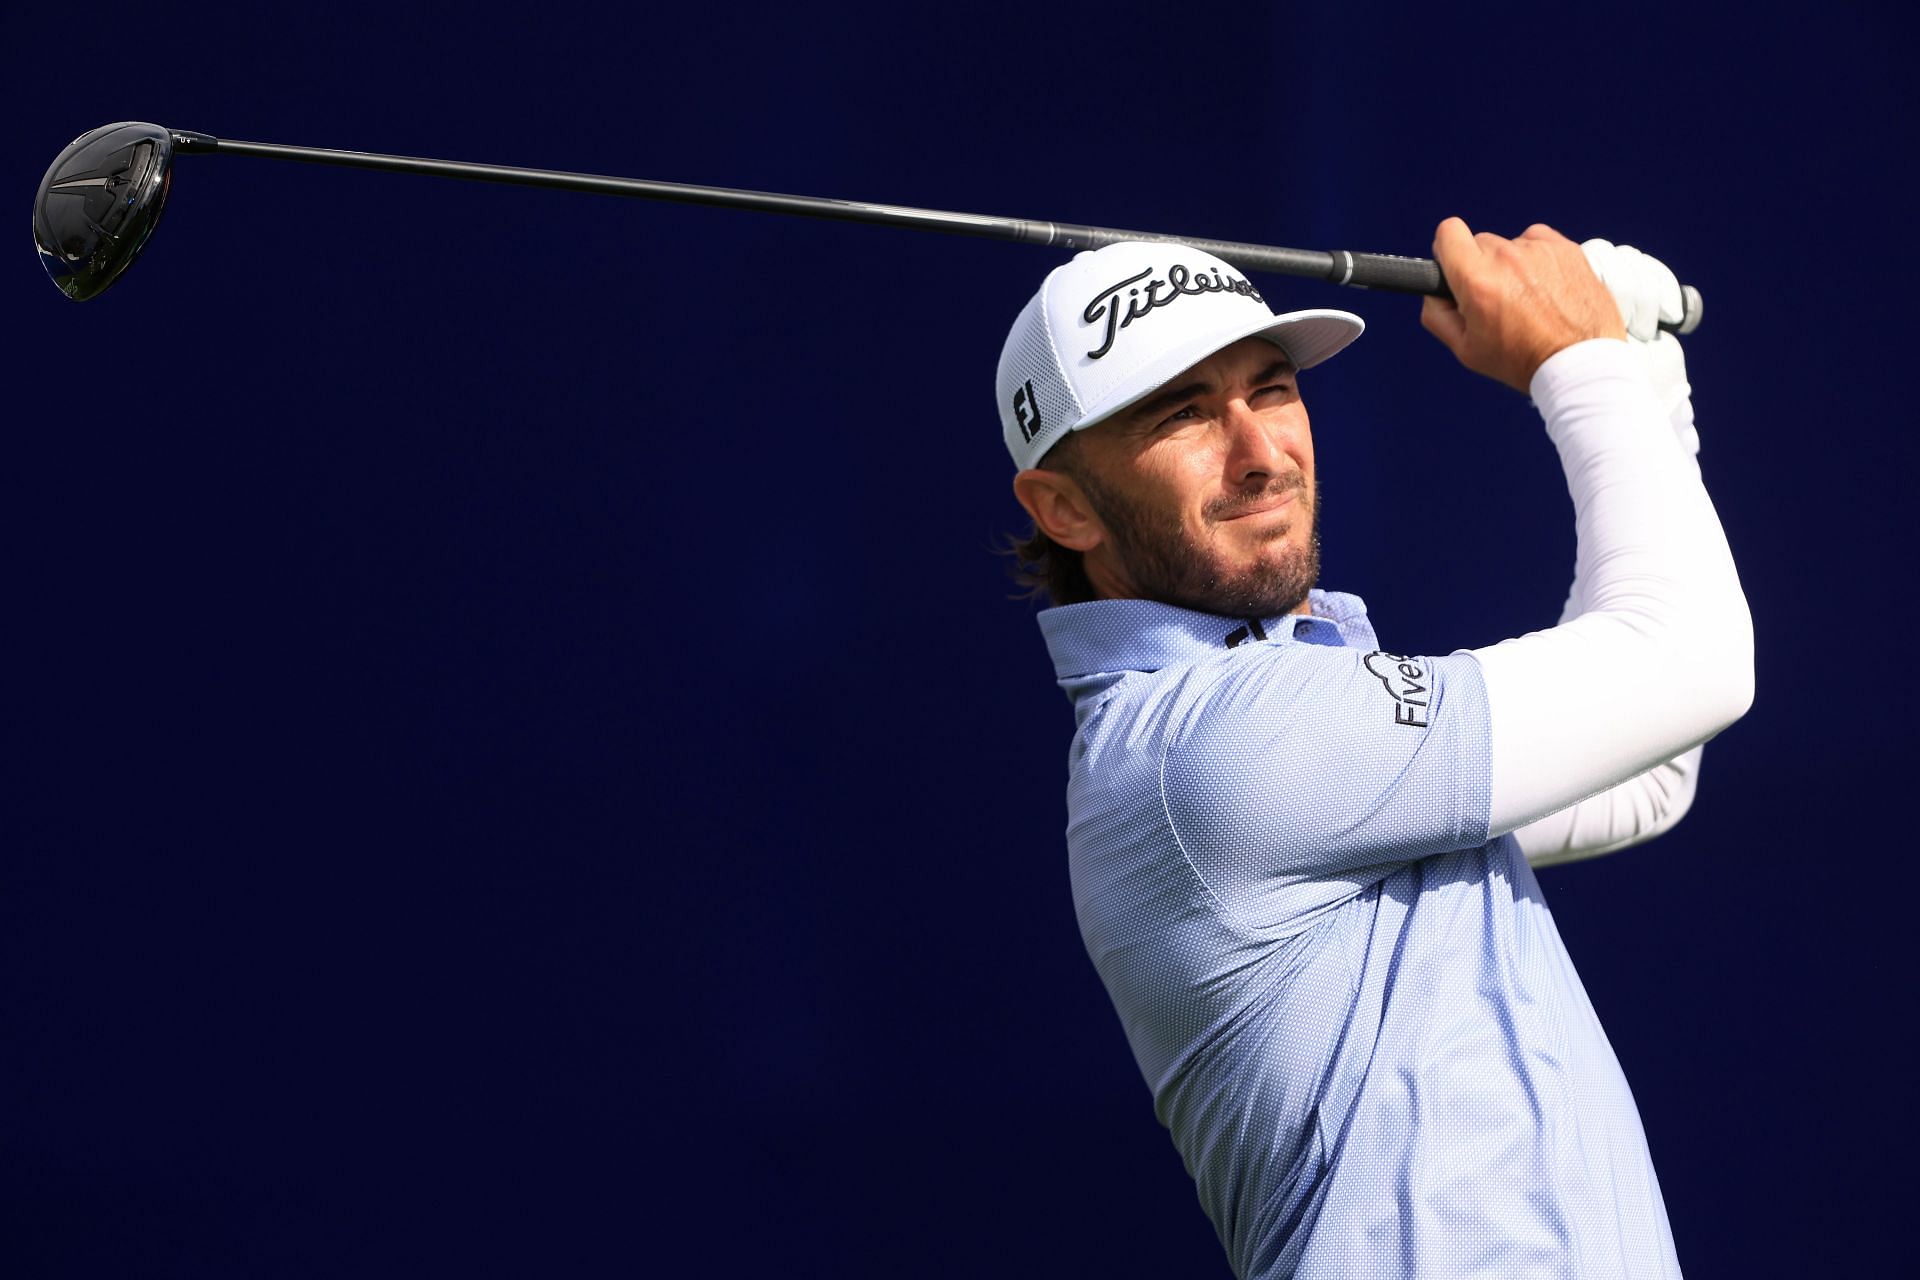 Max Homa is the defending champion at the Farmers Insurance Open